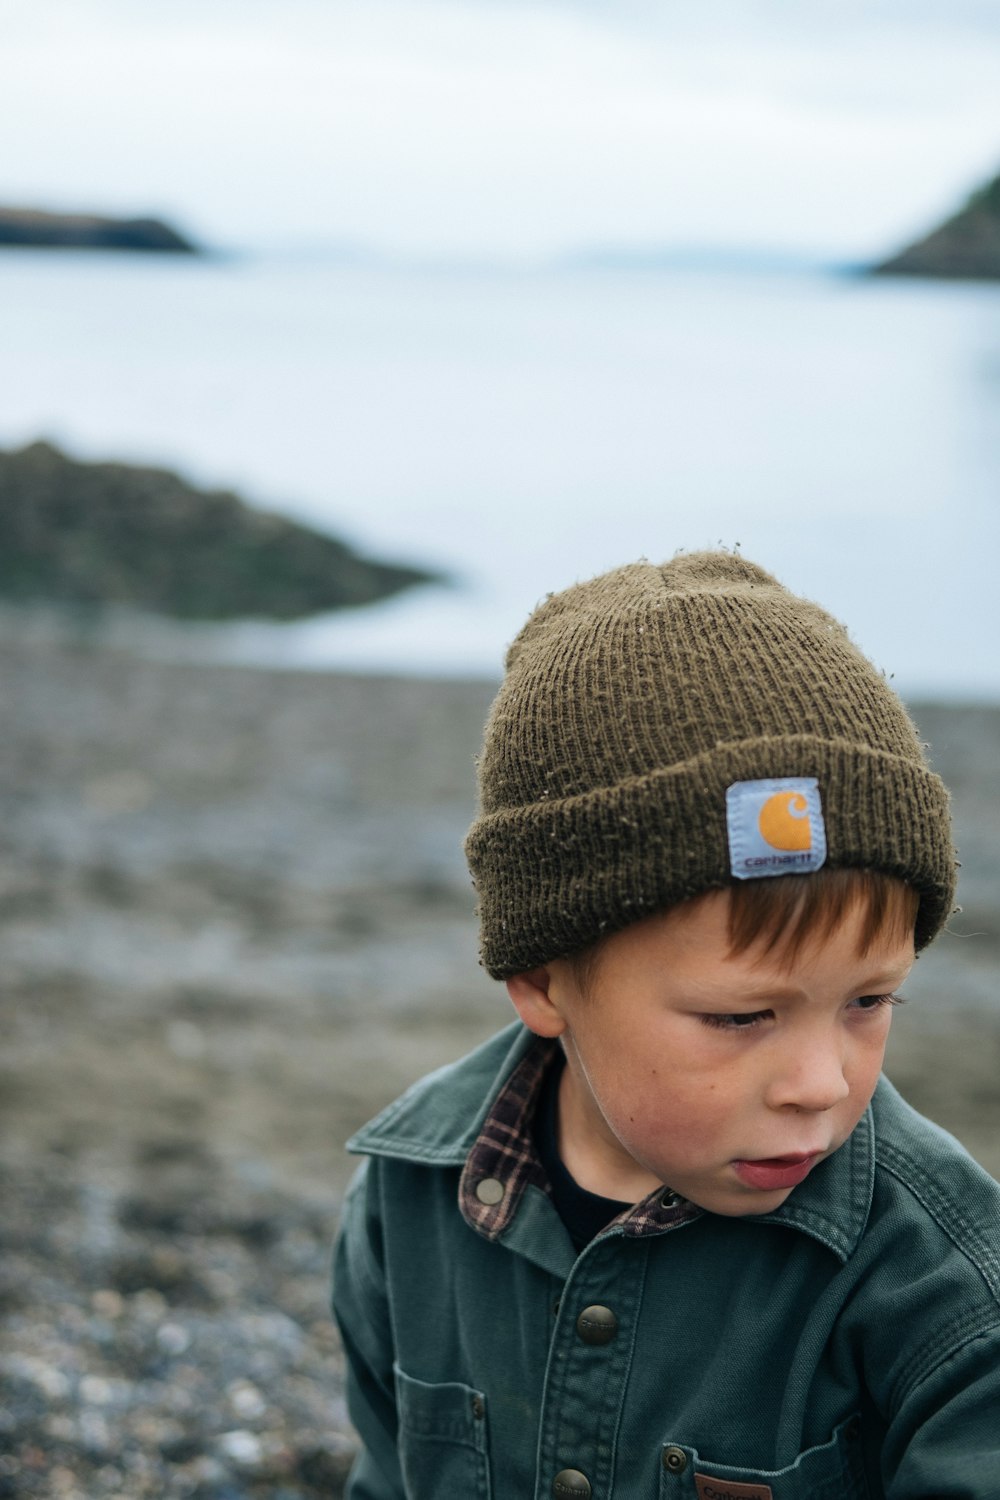 Carhartt Pictures | Download Free Images on Unsplash